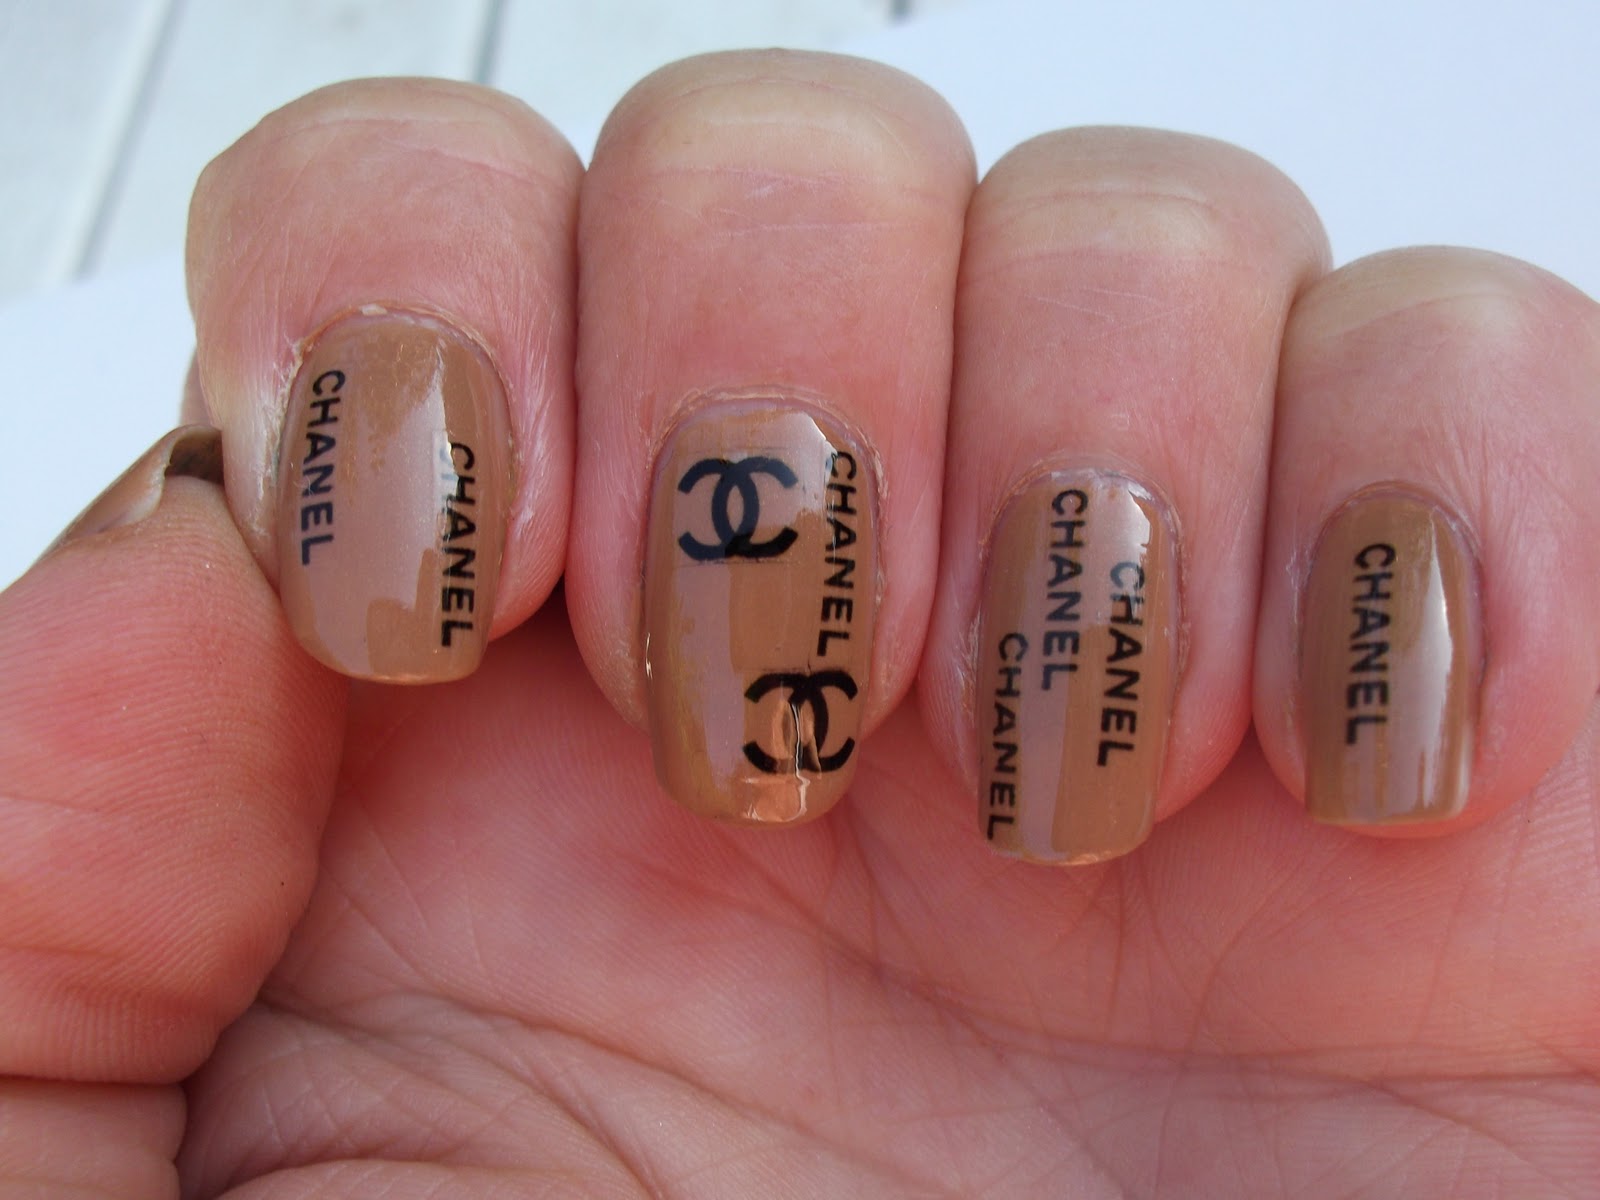 3. Chanel Inspired Dripping Nails - wide 4